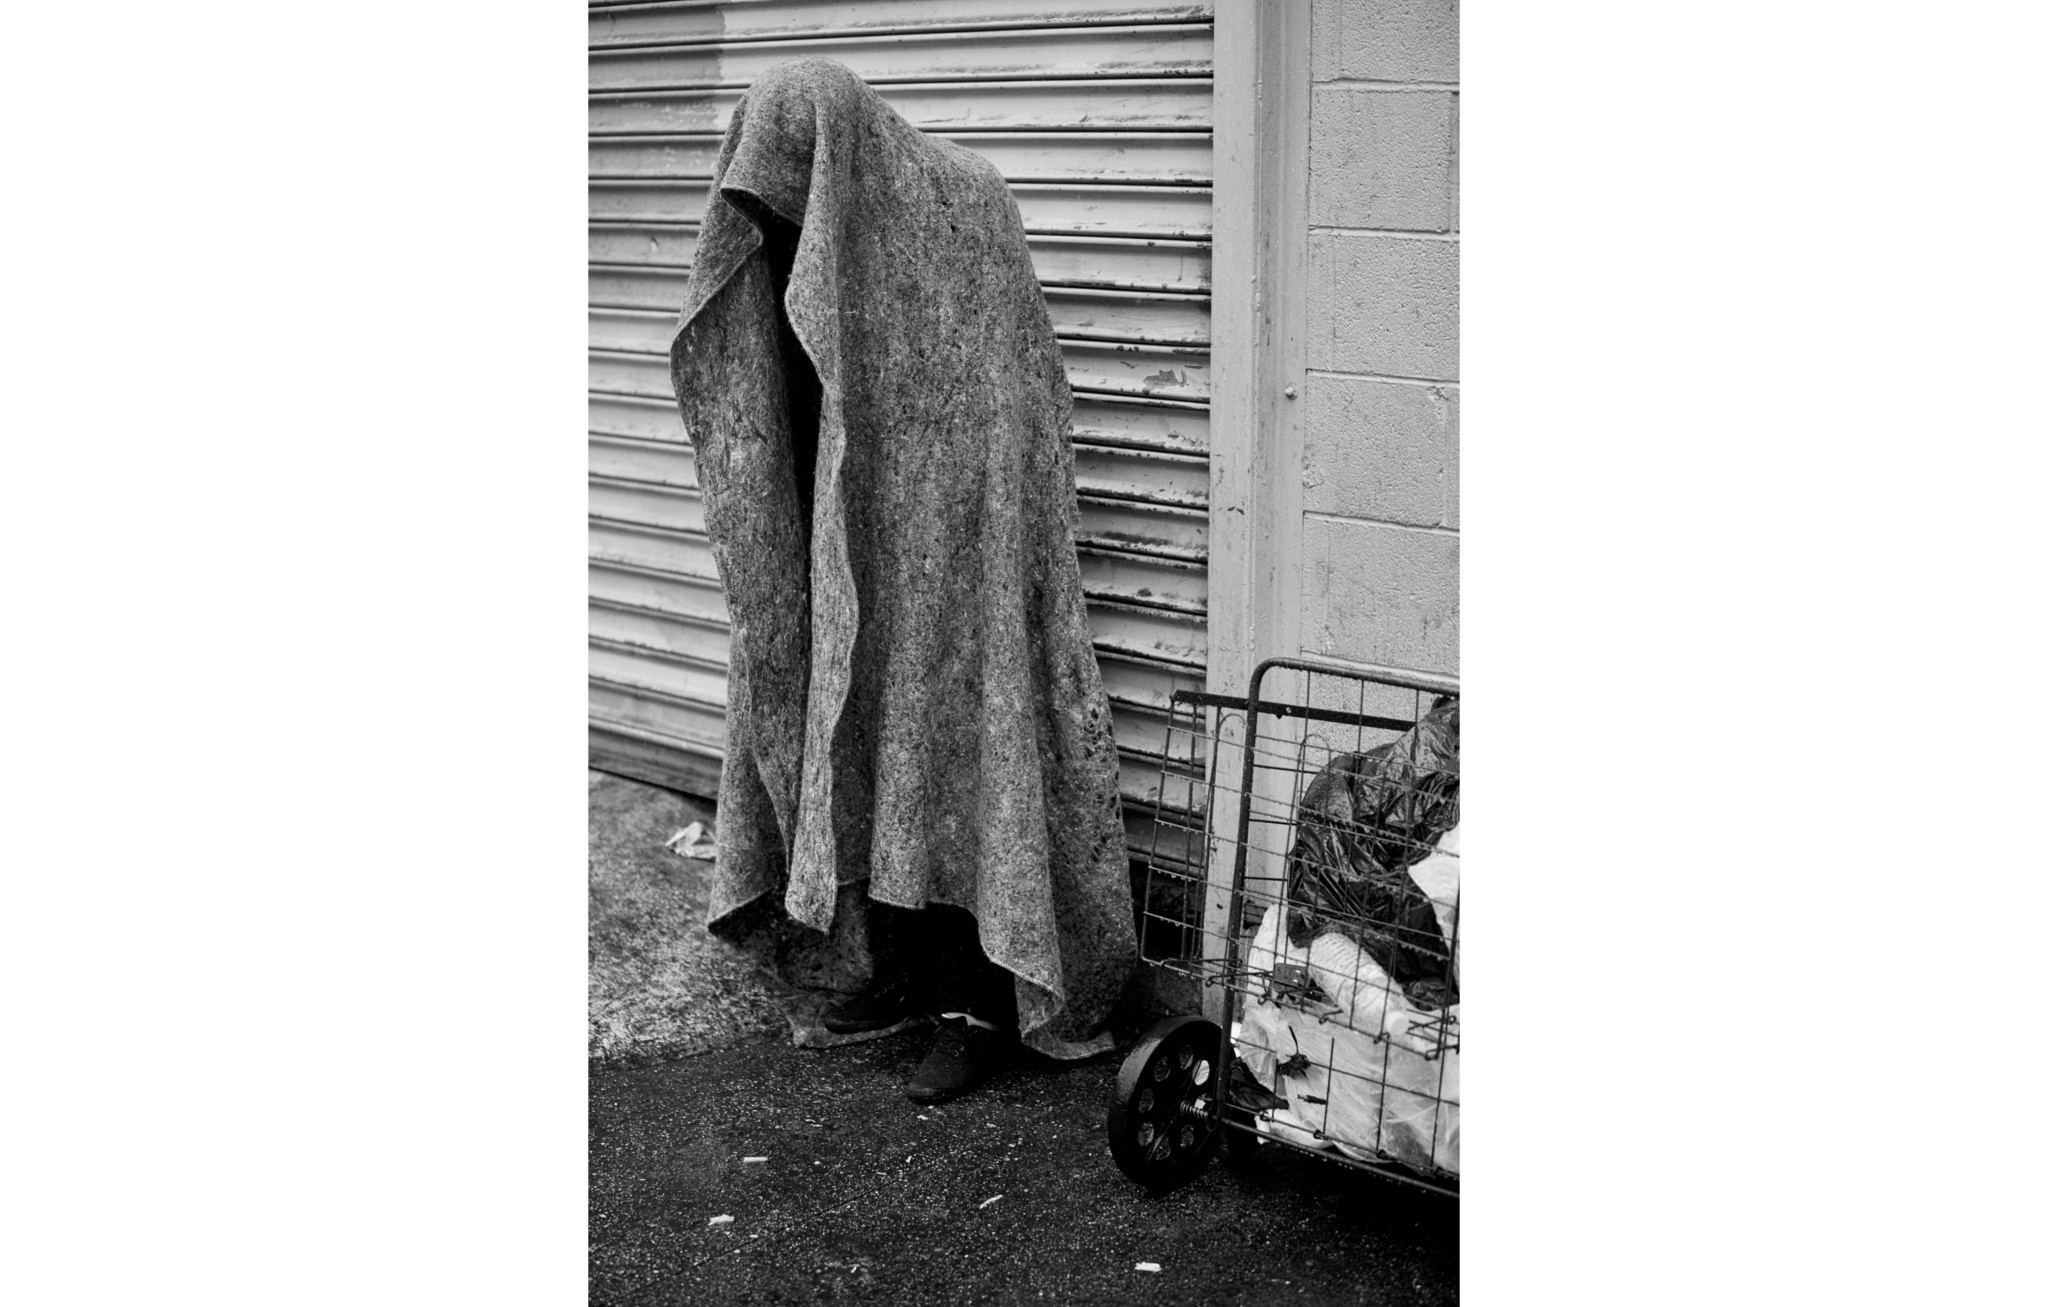 LOS ANGELES, CA - DECEMBER 2, 2014: A person stands beneath a blanket in the rain trying to keep dry